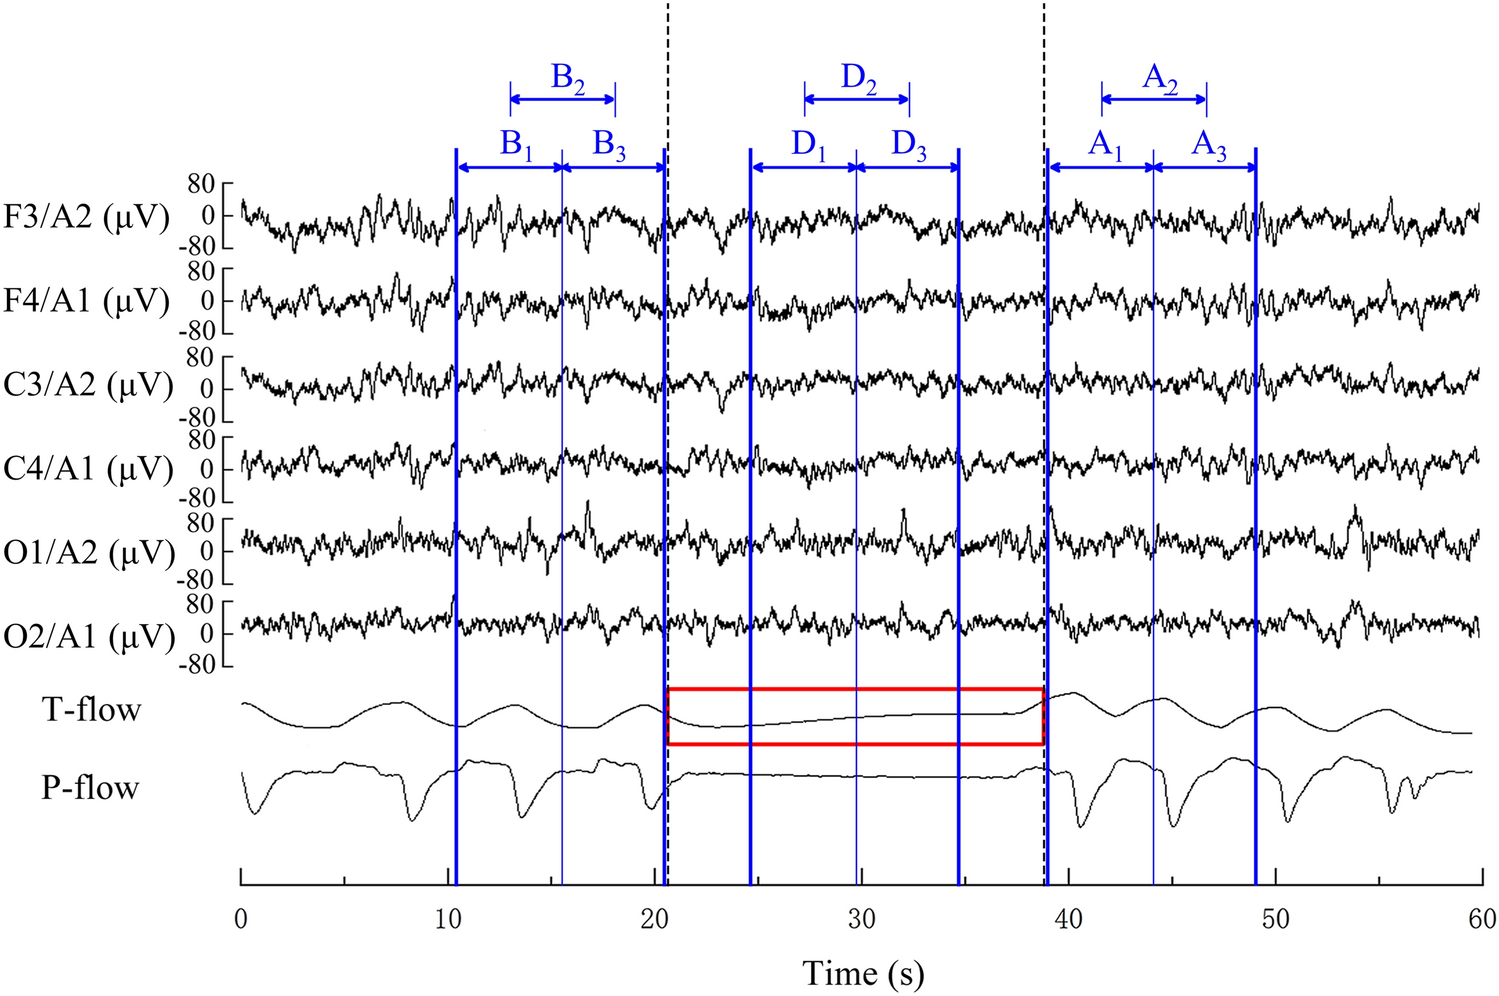 Altered Cortical Information Interaction During Respiratory Events in Children with Obstructive Sleep Apnea-Hypopnea Syndrome